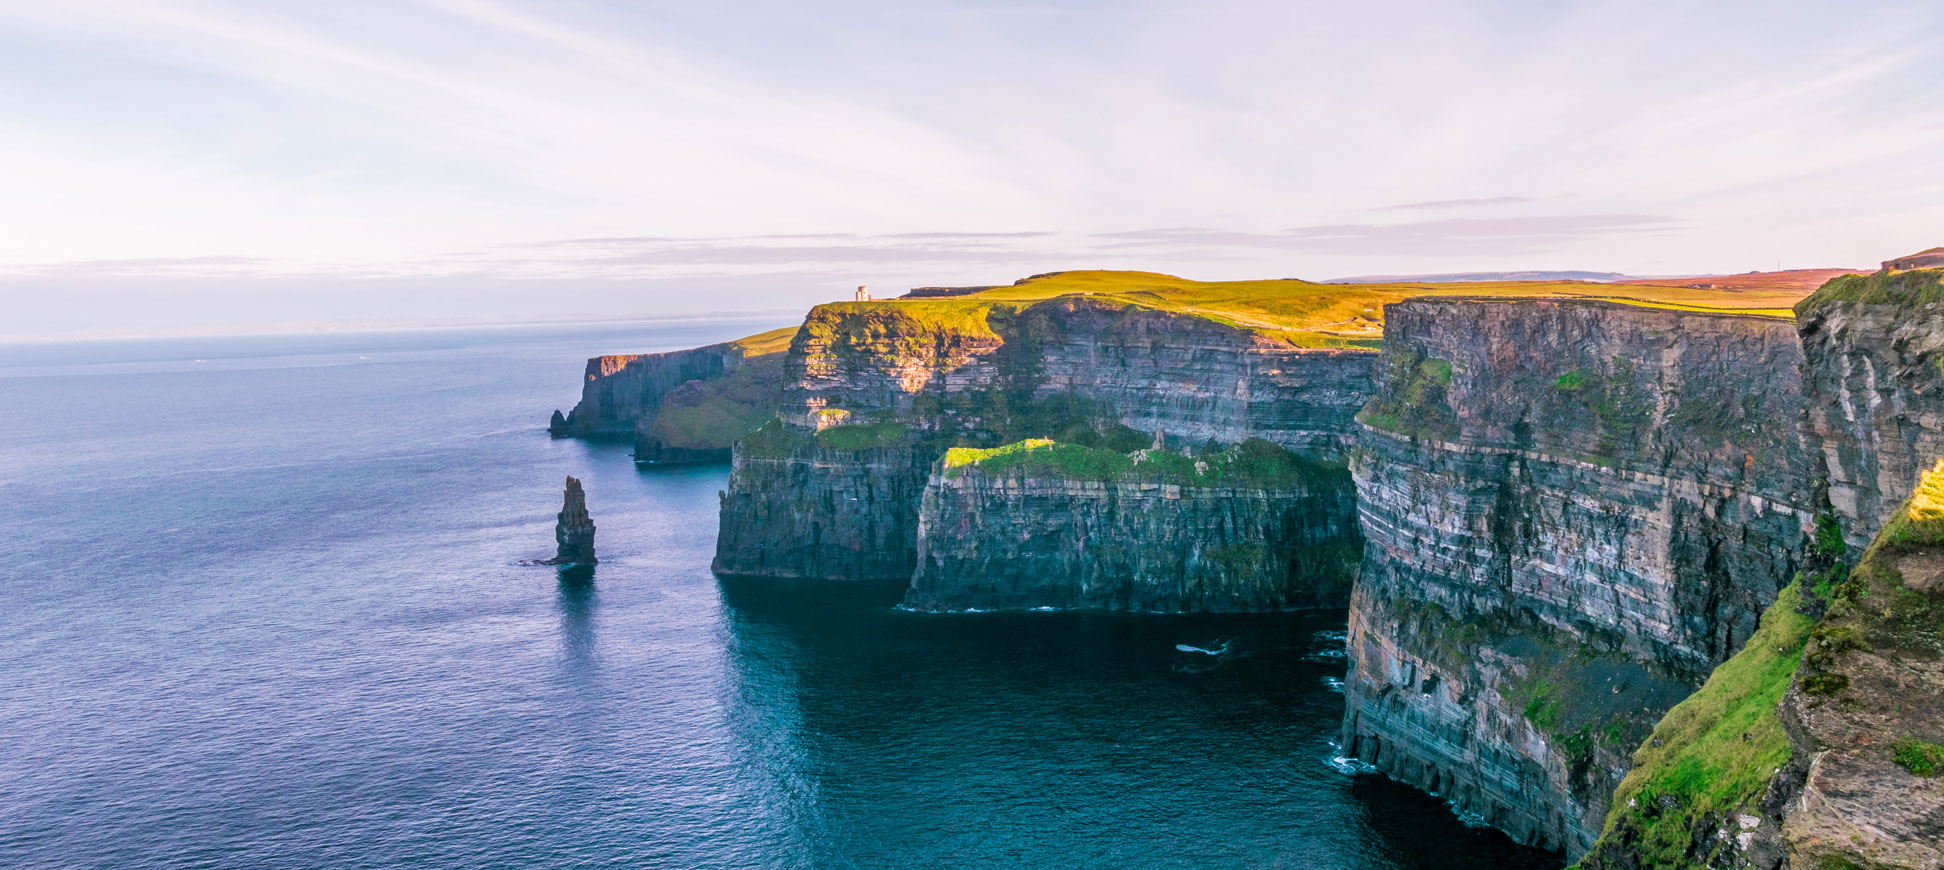 The famous Cliffs of Moher in County Clare, Ireland.